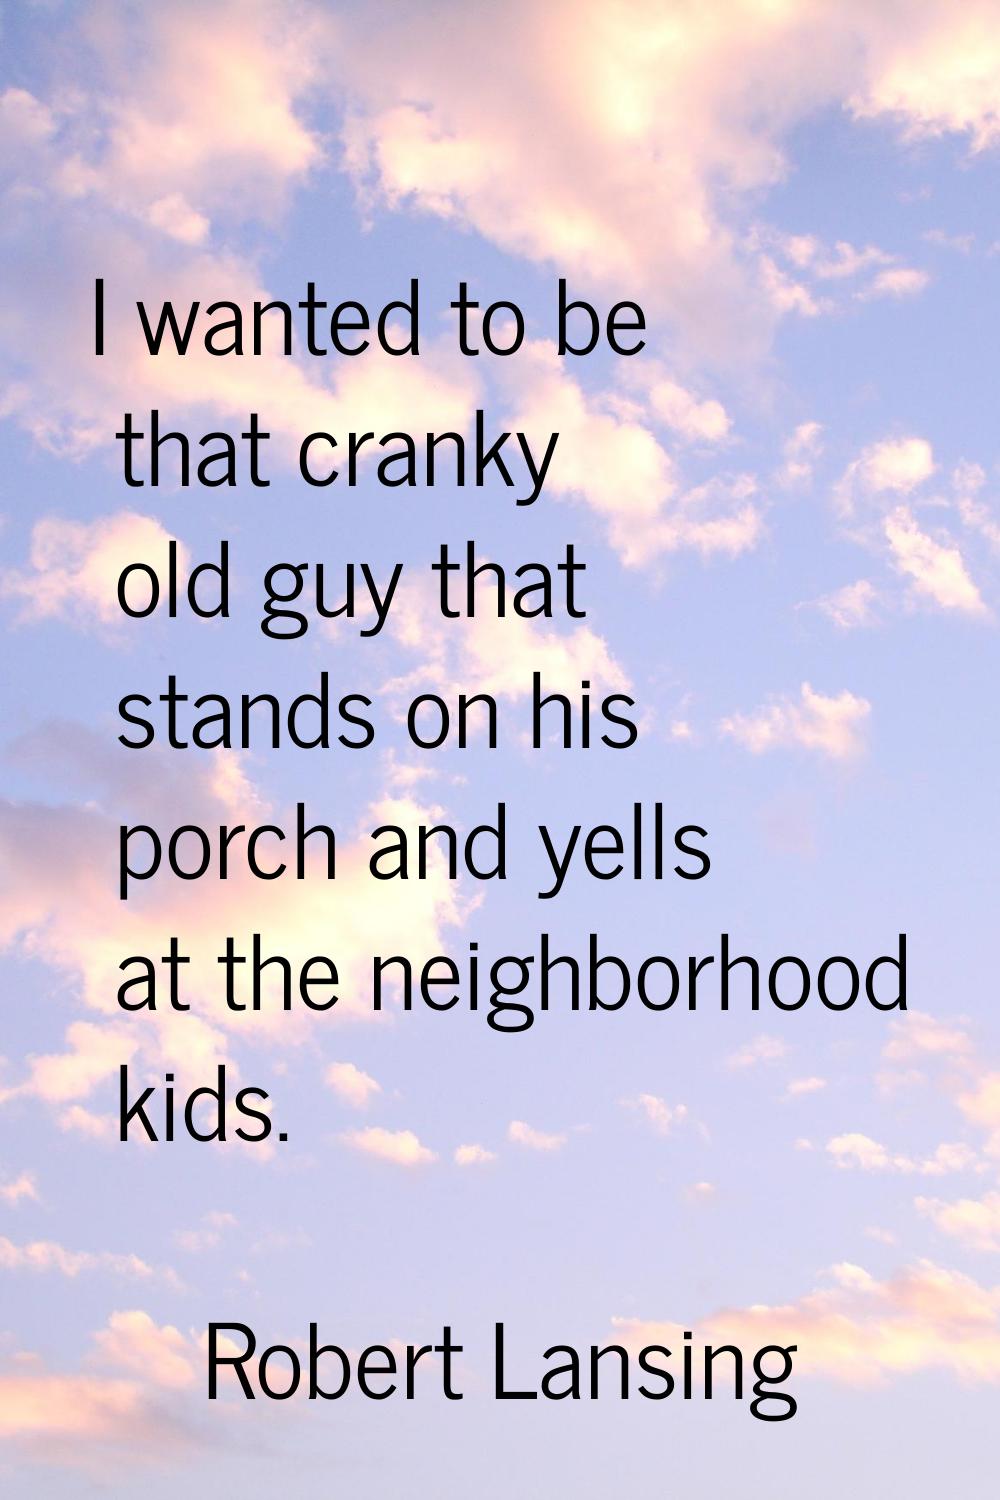 I wanted to be that cranky old guy that stands on his porch and yells at the neighborhood kids.